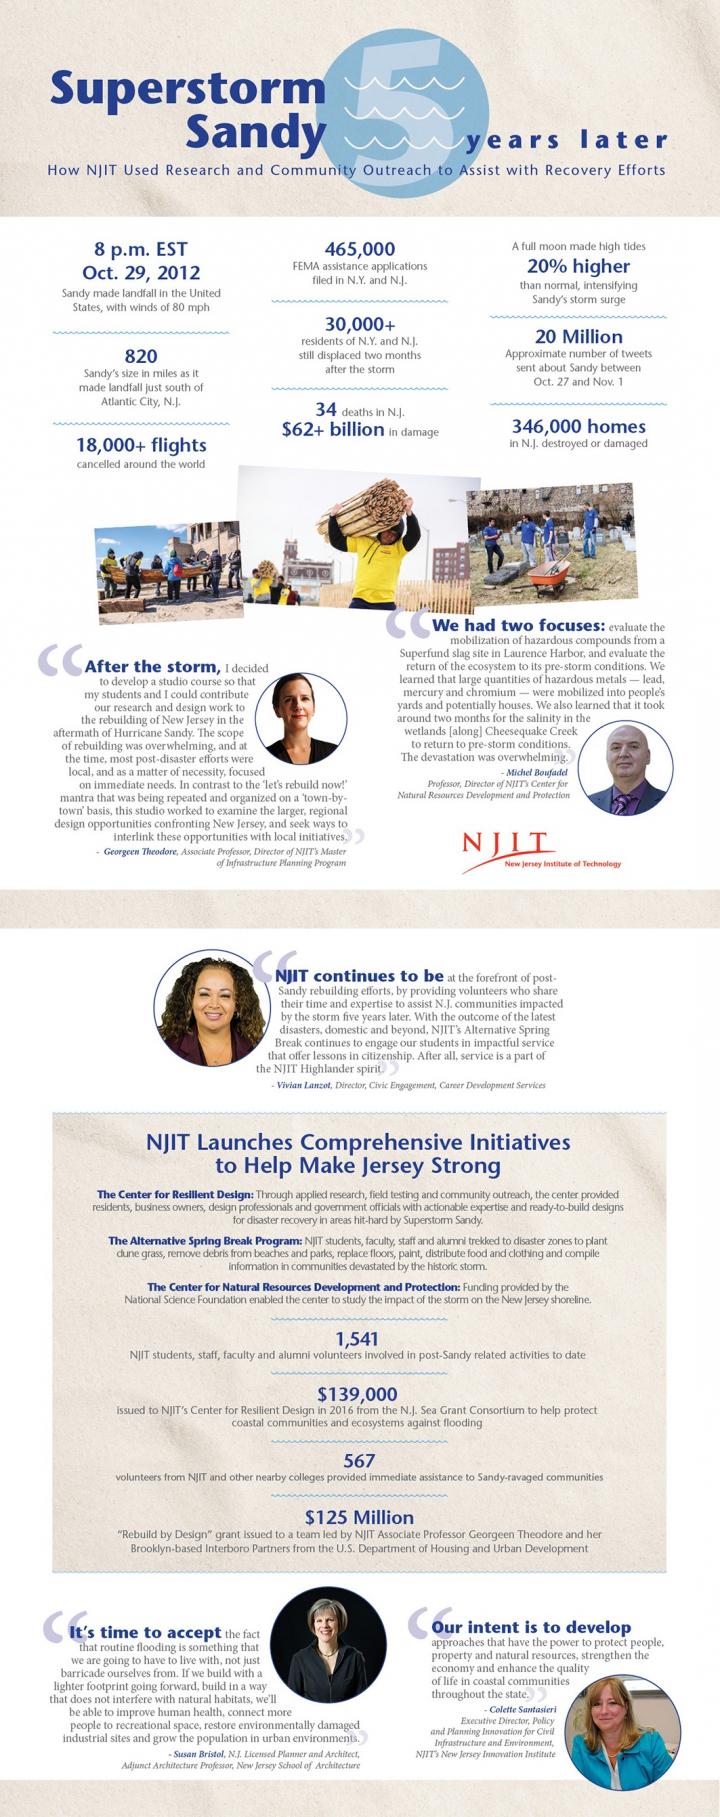 Superstorm Sandy Five Years Later: How NJIT Used Research and Community Outreach to Assist With Recovery Efforts